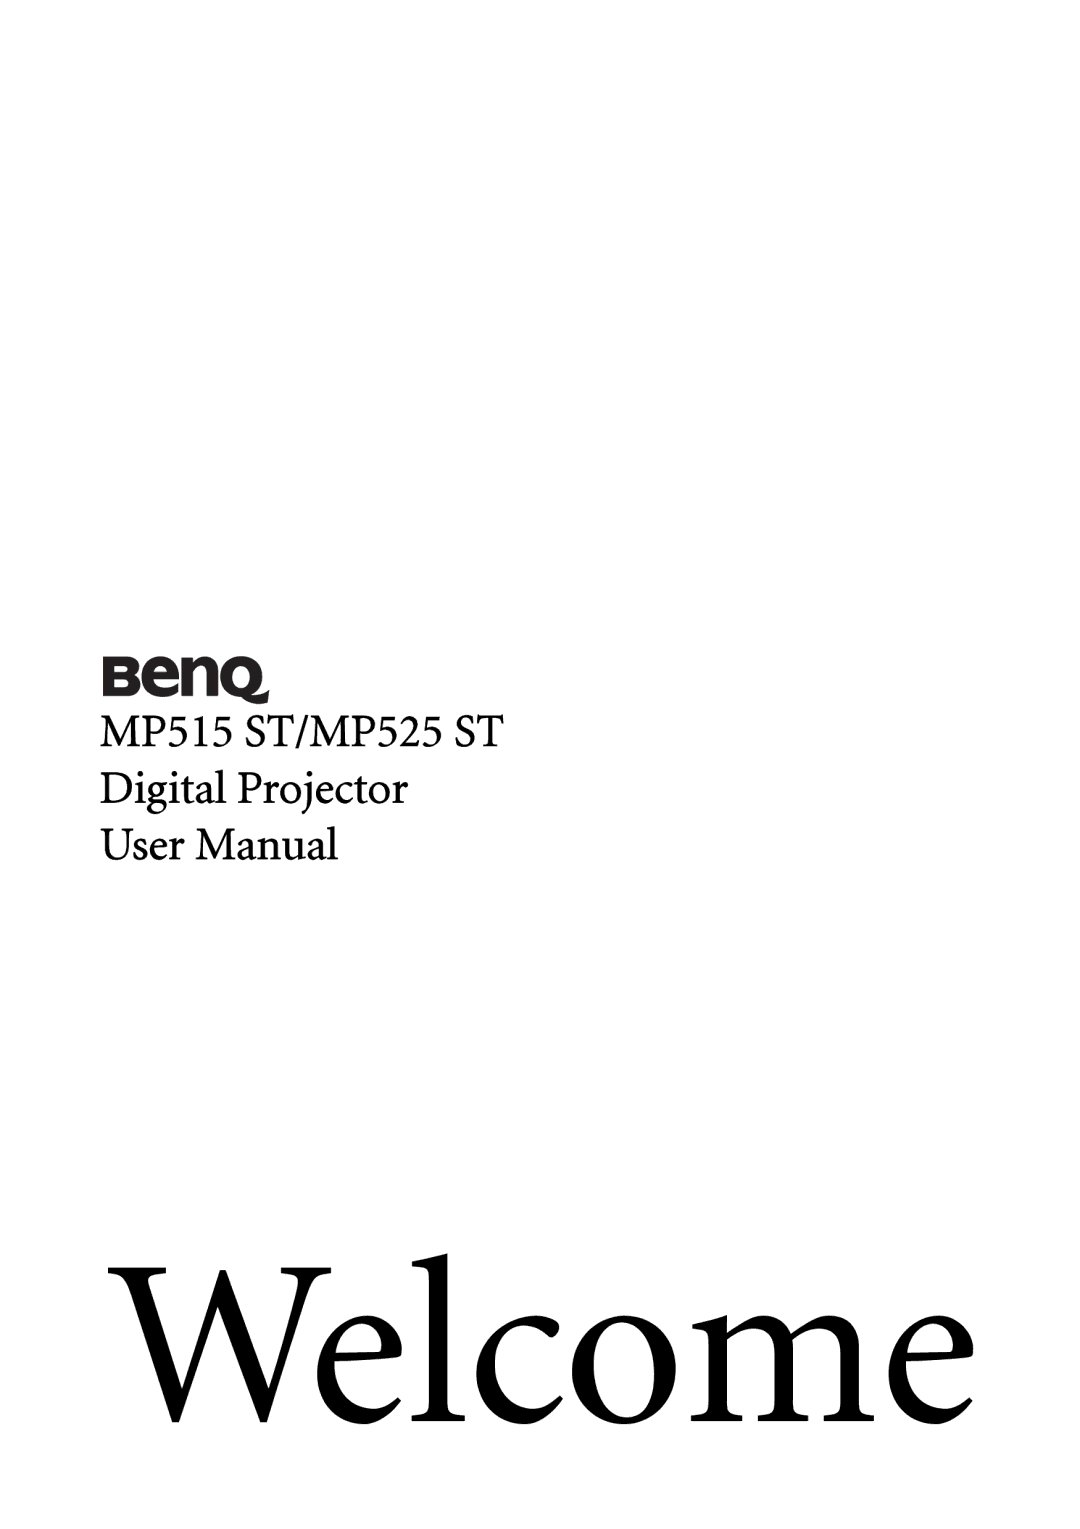 BenQ MP515 ST, MP525 ST user manual Welcome 